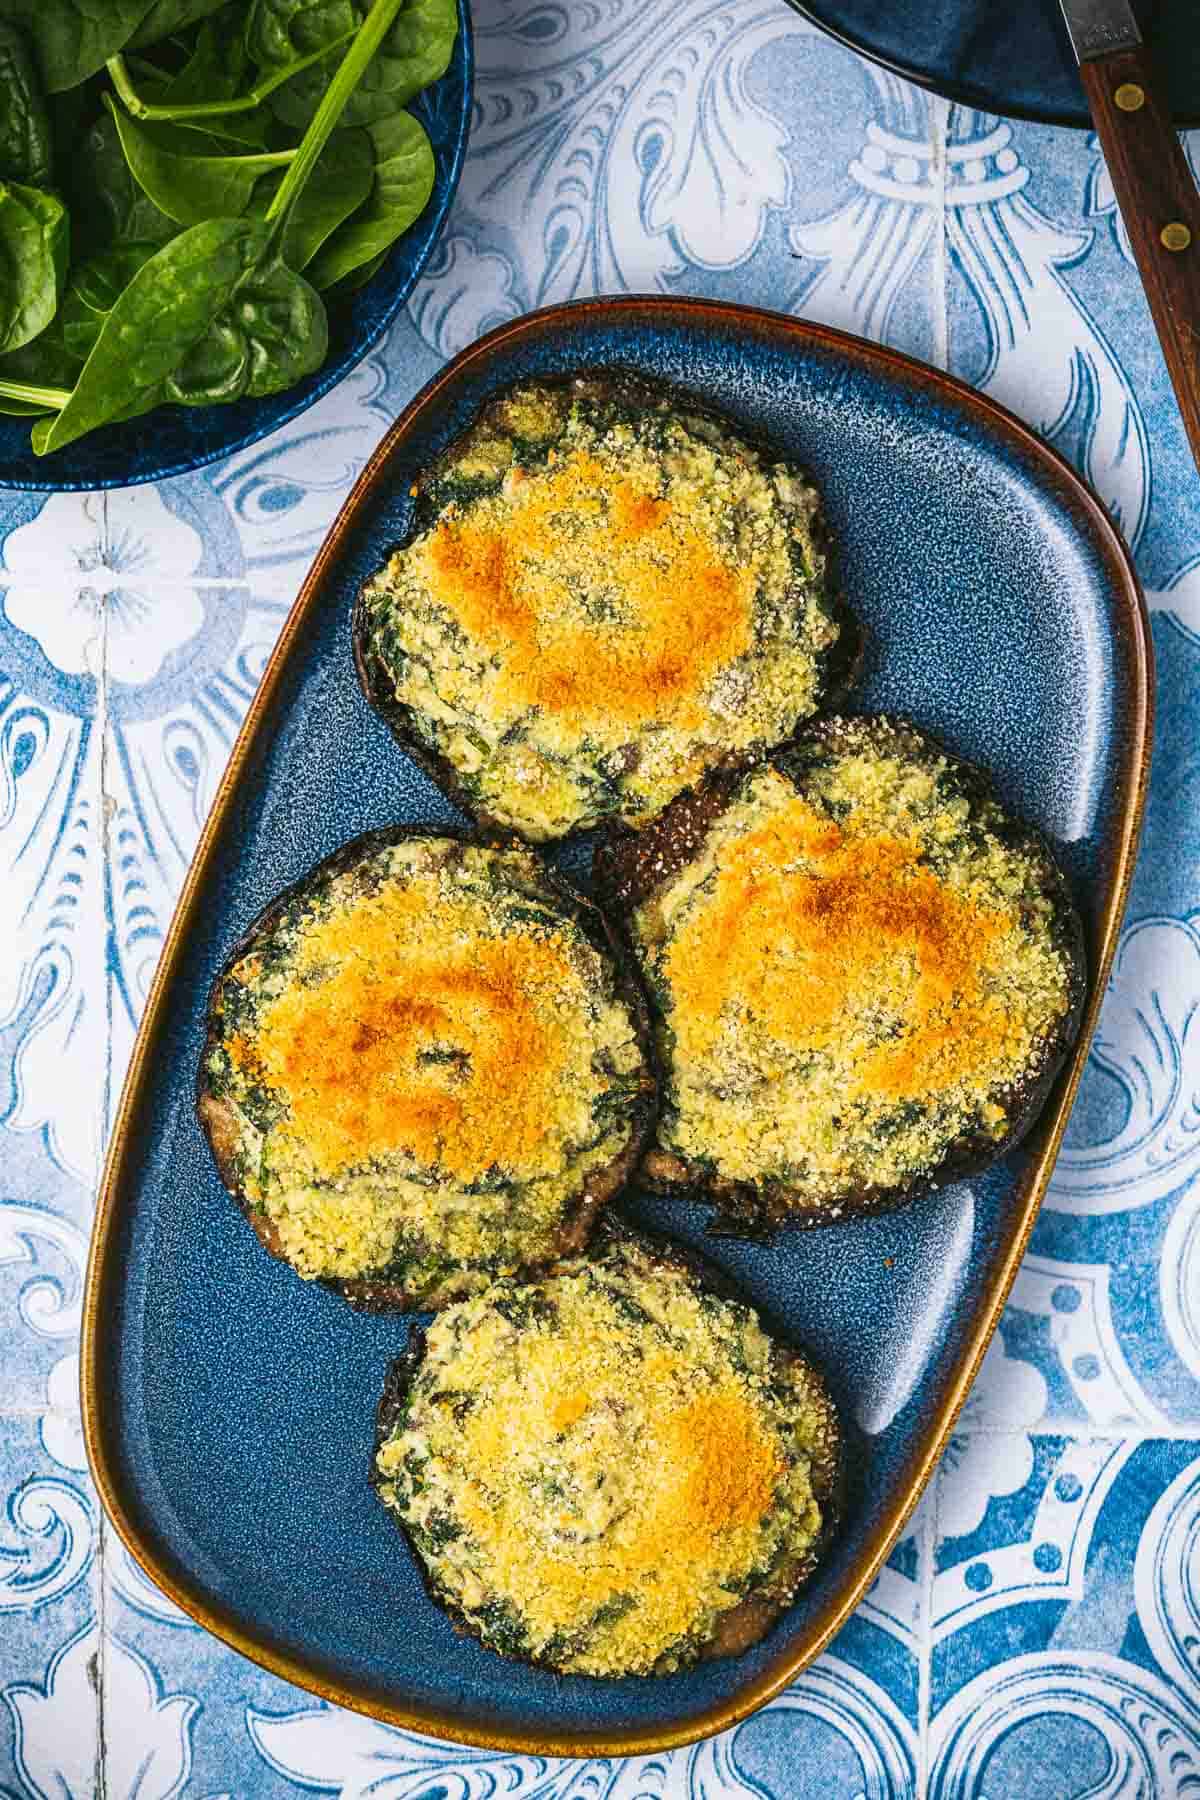 4 cooked stuffed portobello mushrooms on a serving platter next to a bowl of baby spinach.